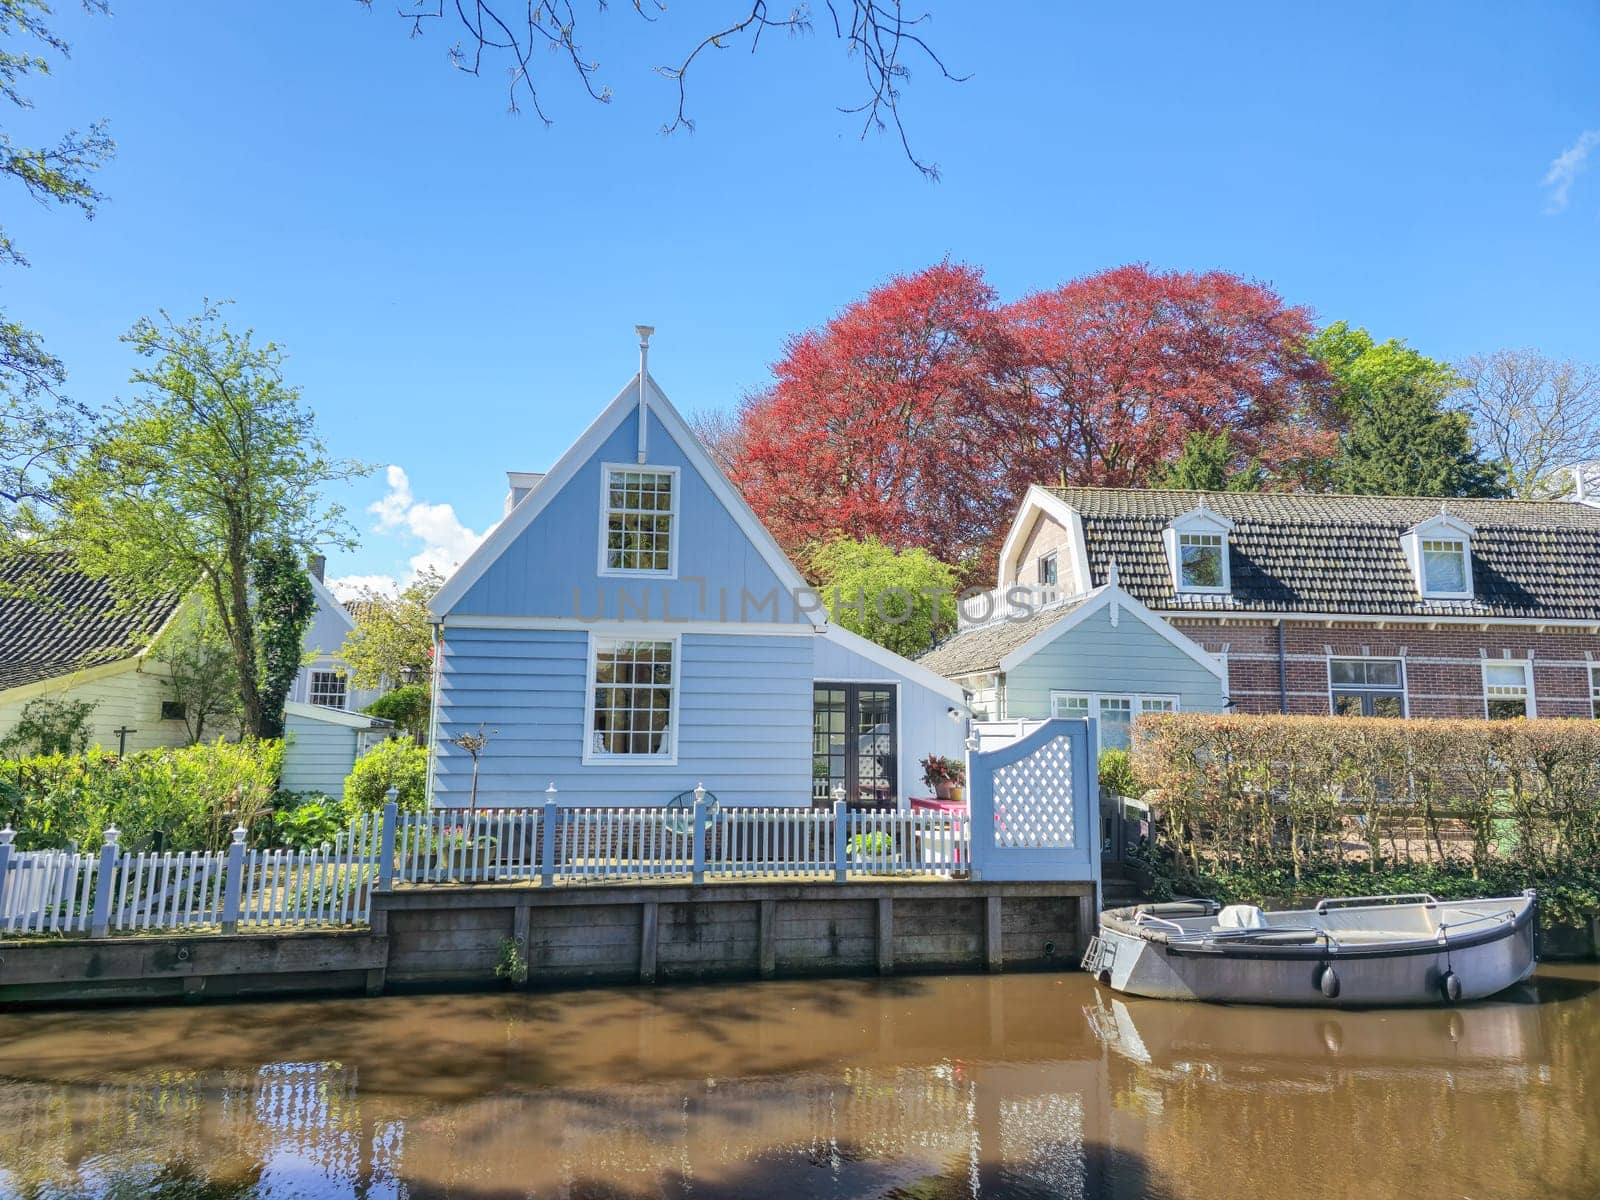 A quaint blue house peacefully sits beside a calm body of water, surrounded by a tranquil and picturesque setting. Broek in Waterland Netherlands